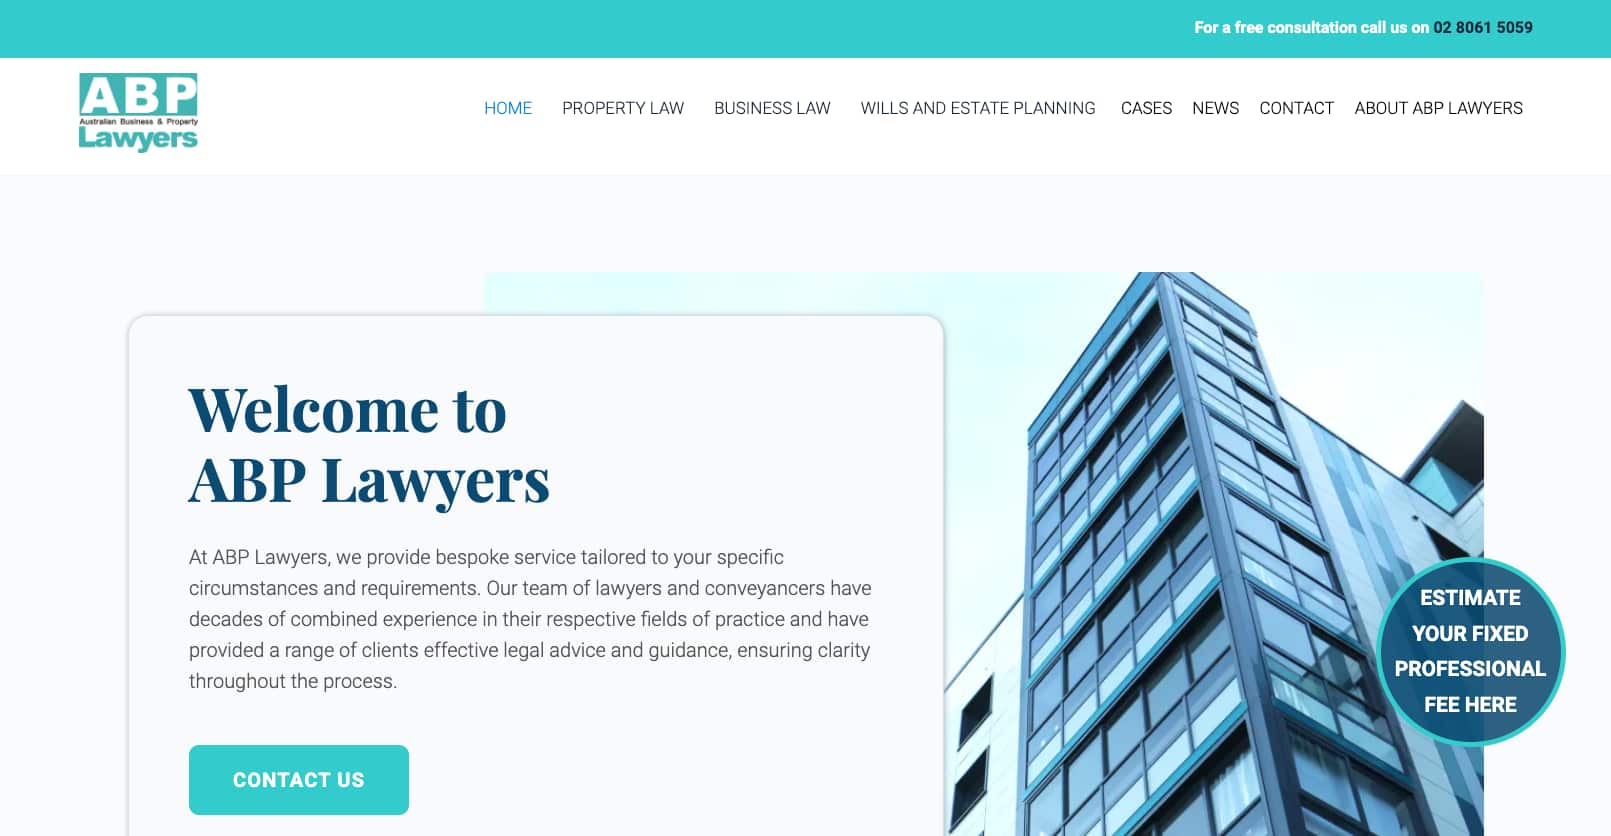 ABP Lawyers